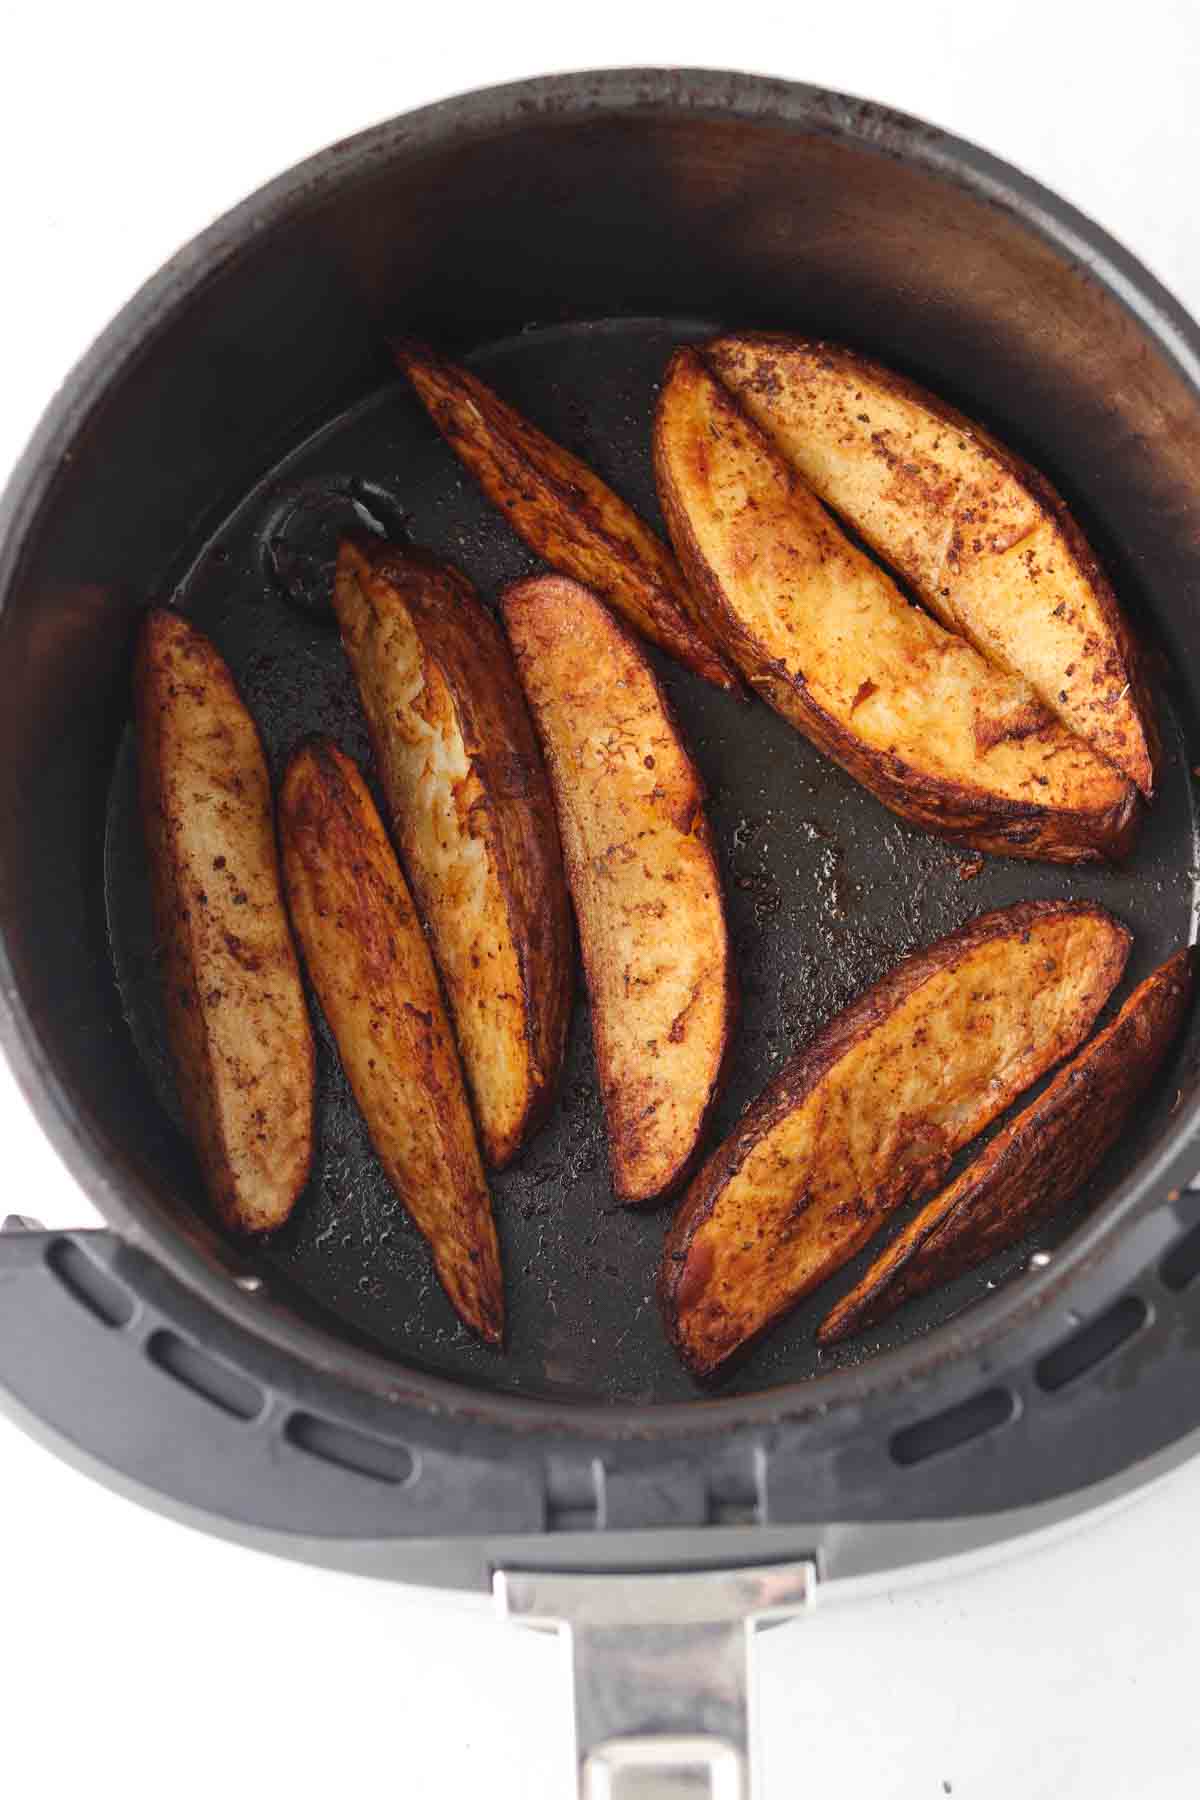 Potato skins in the air fryer.